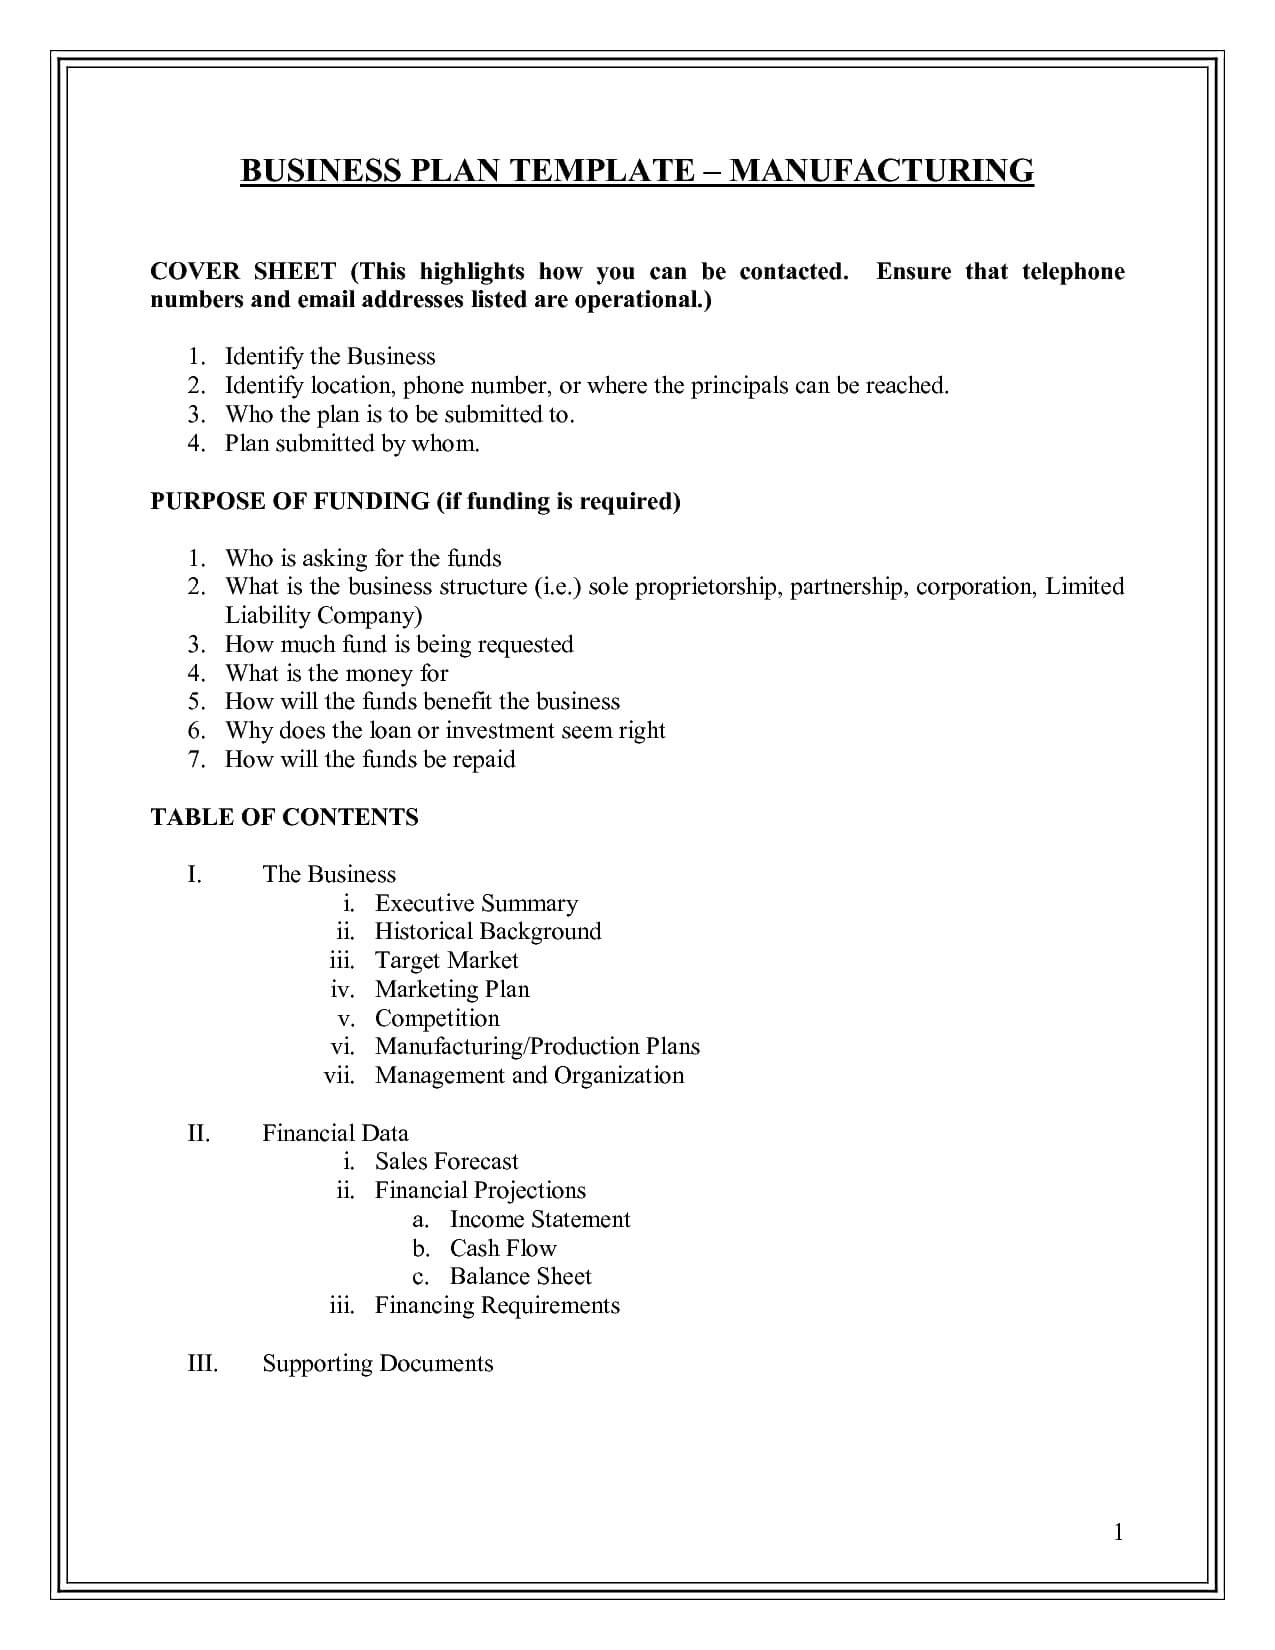 Business Plans Template Design Law Firm Plan Free Collection Regarding Business Plan Template Law Firm